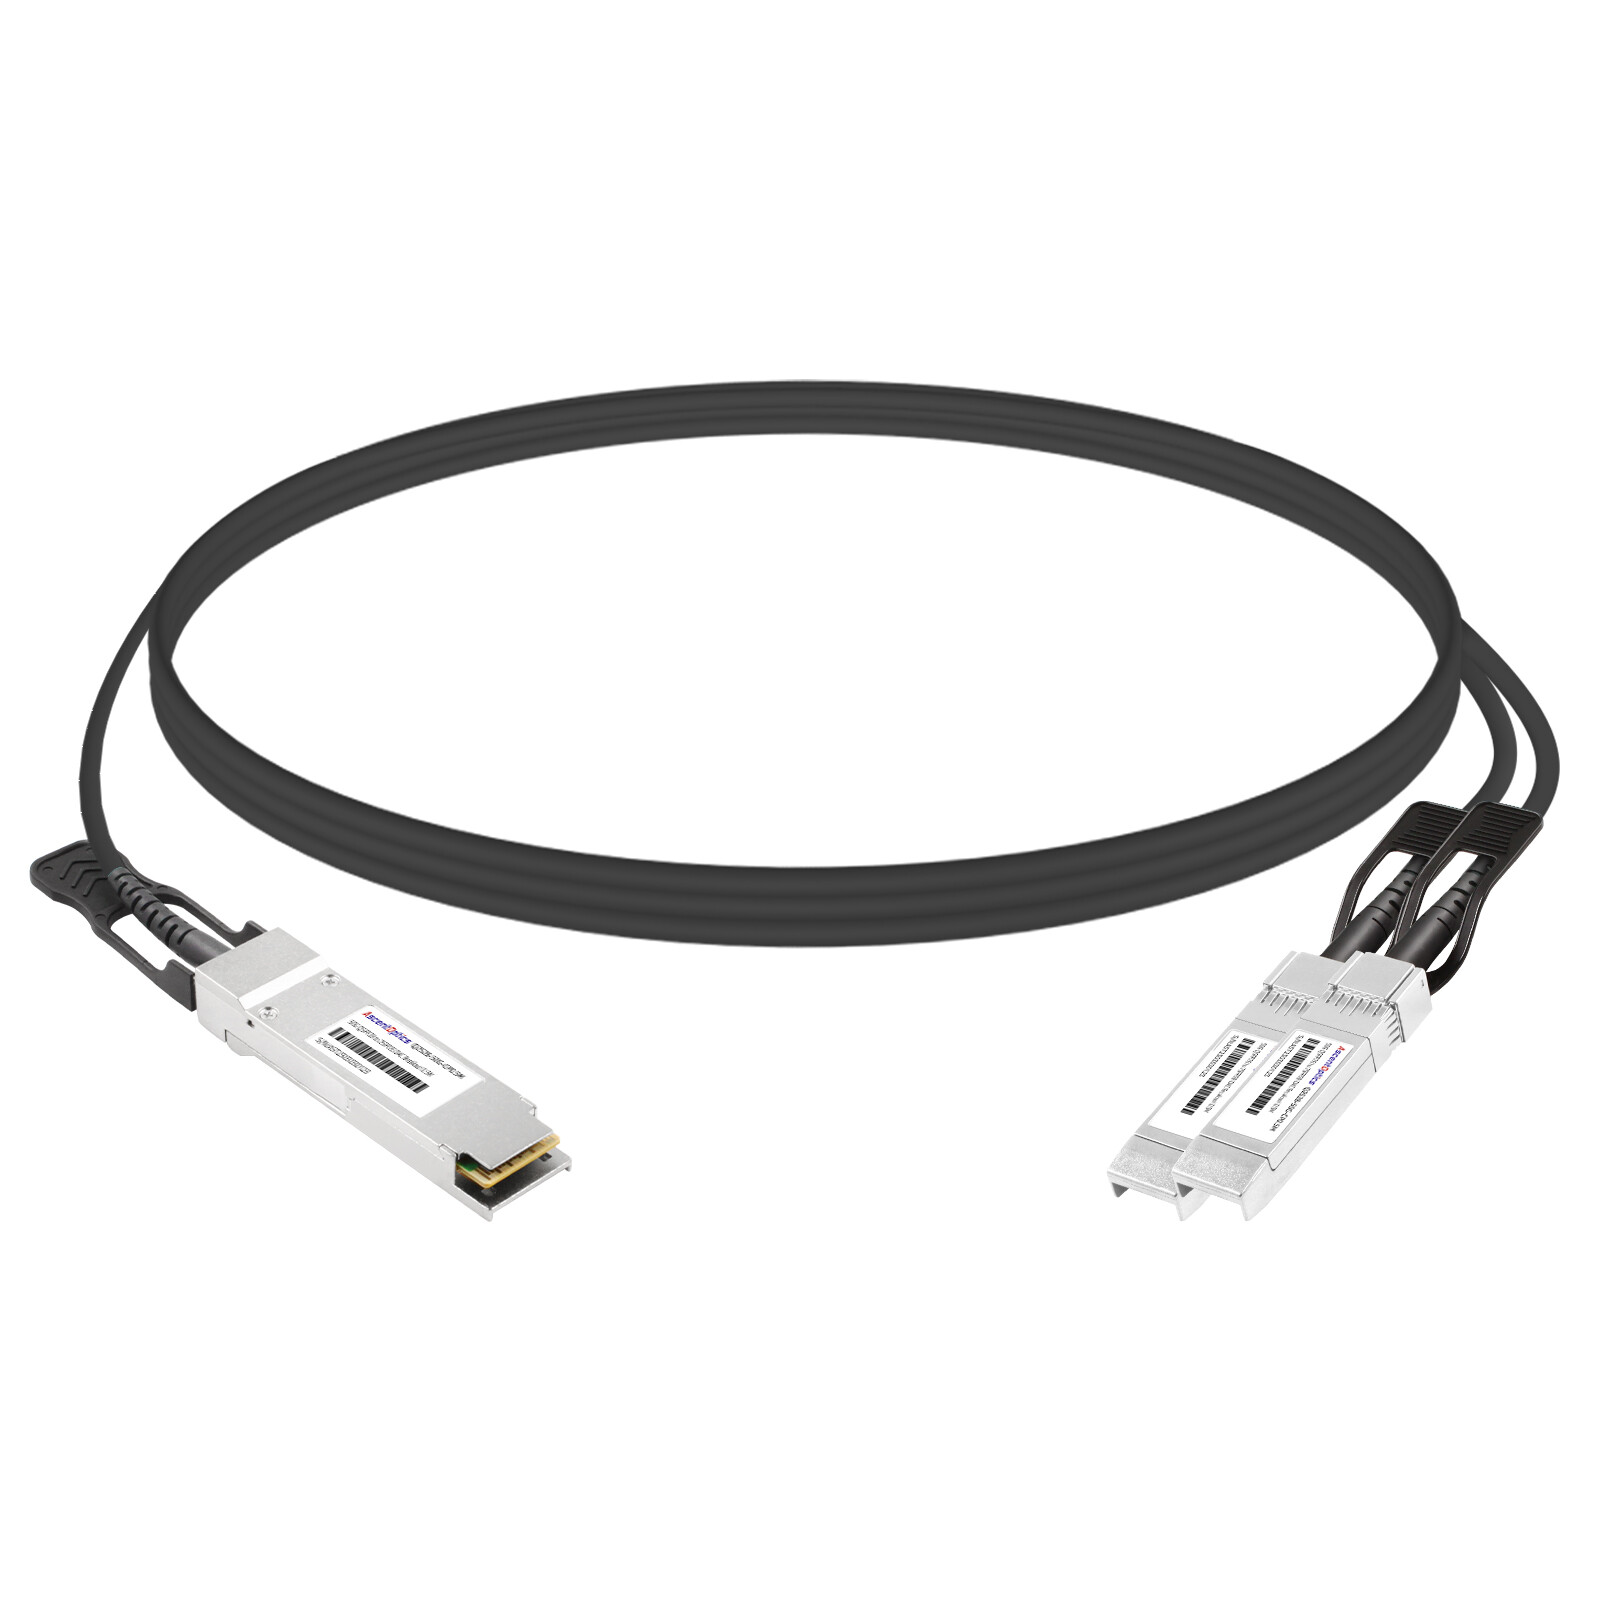 50G DSFP to 2x 25G SFP28 Copper Breakout Cable,3 Meters,Passive